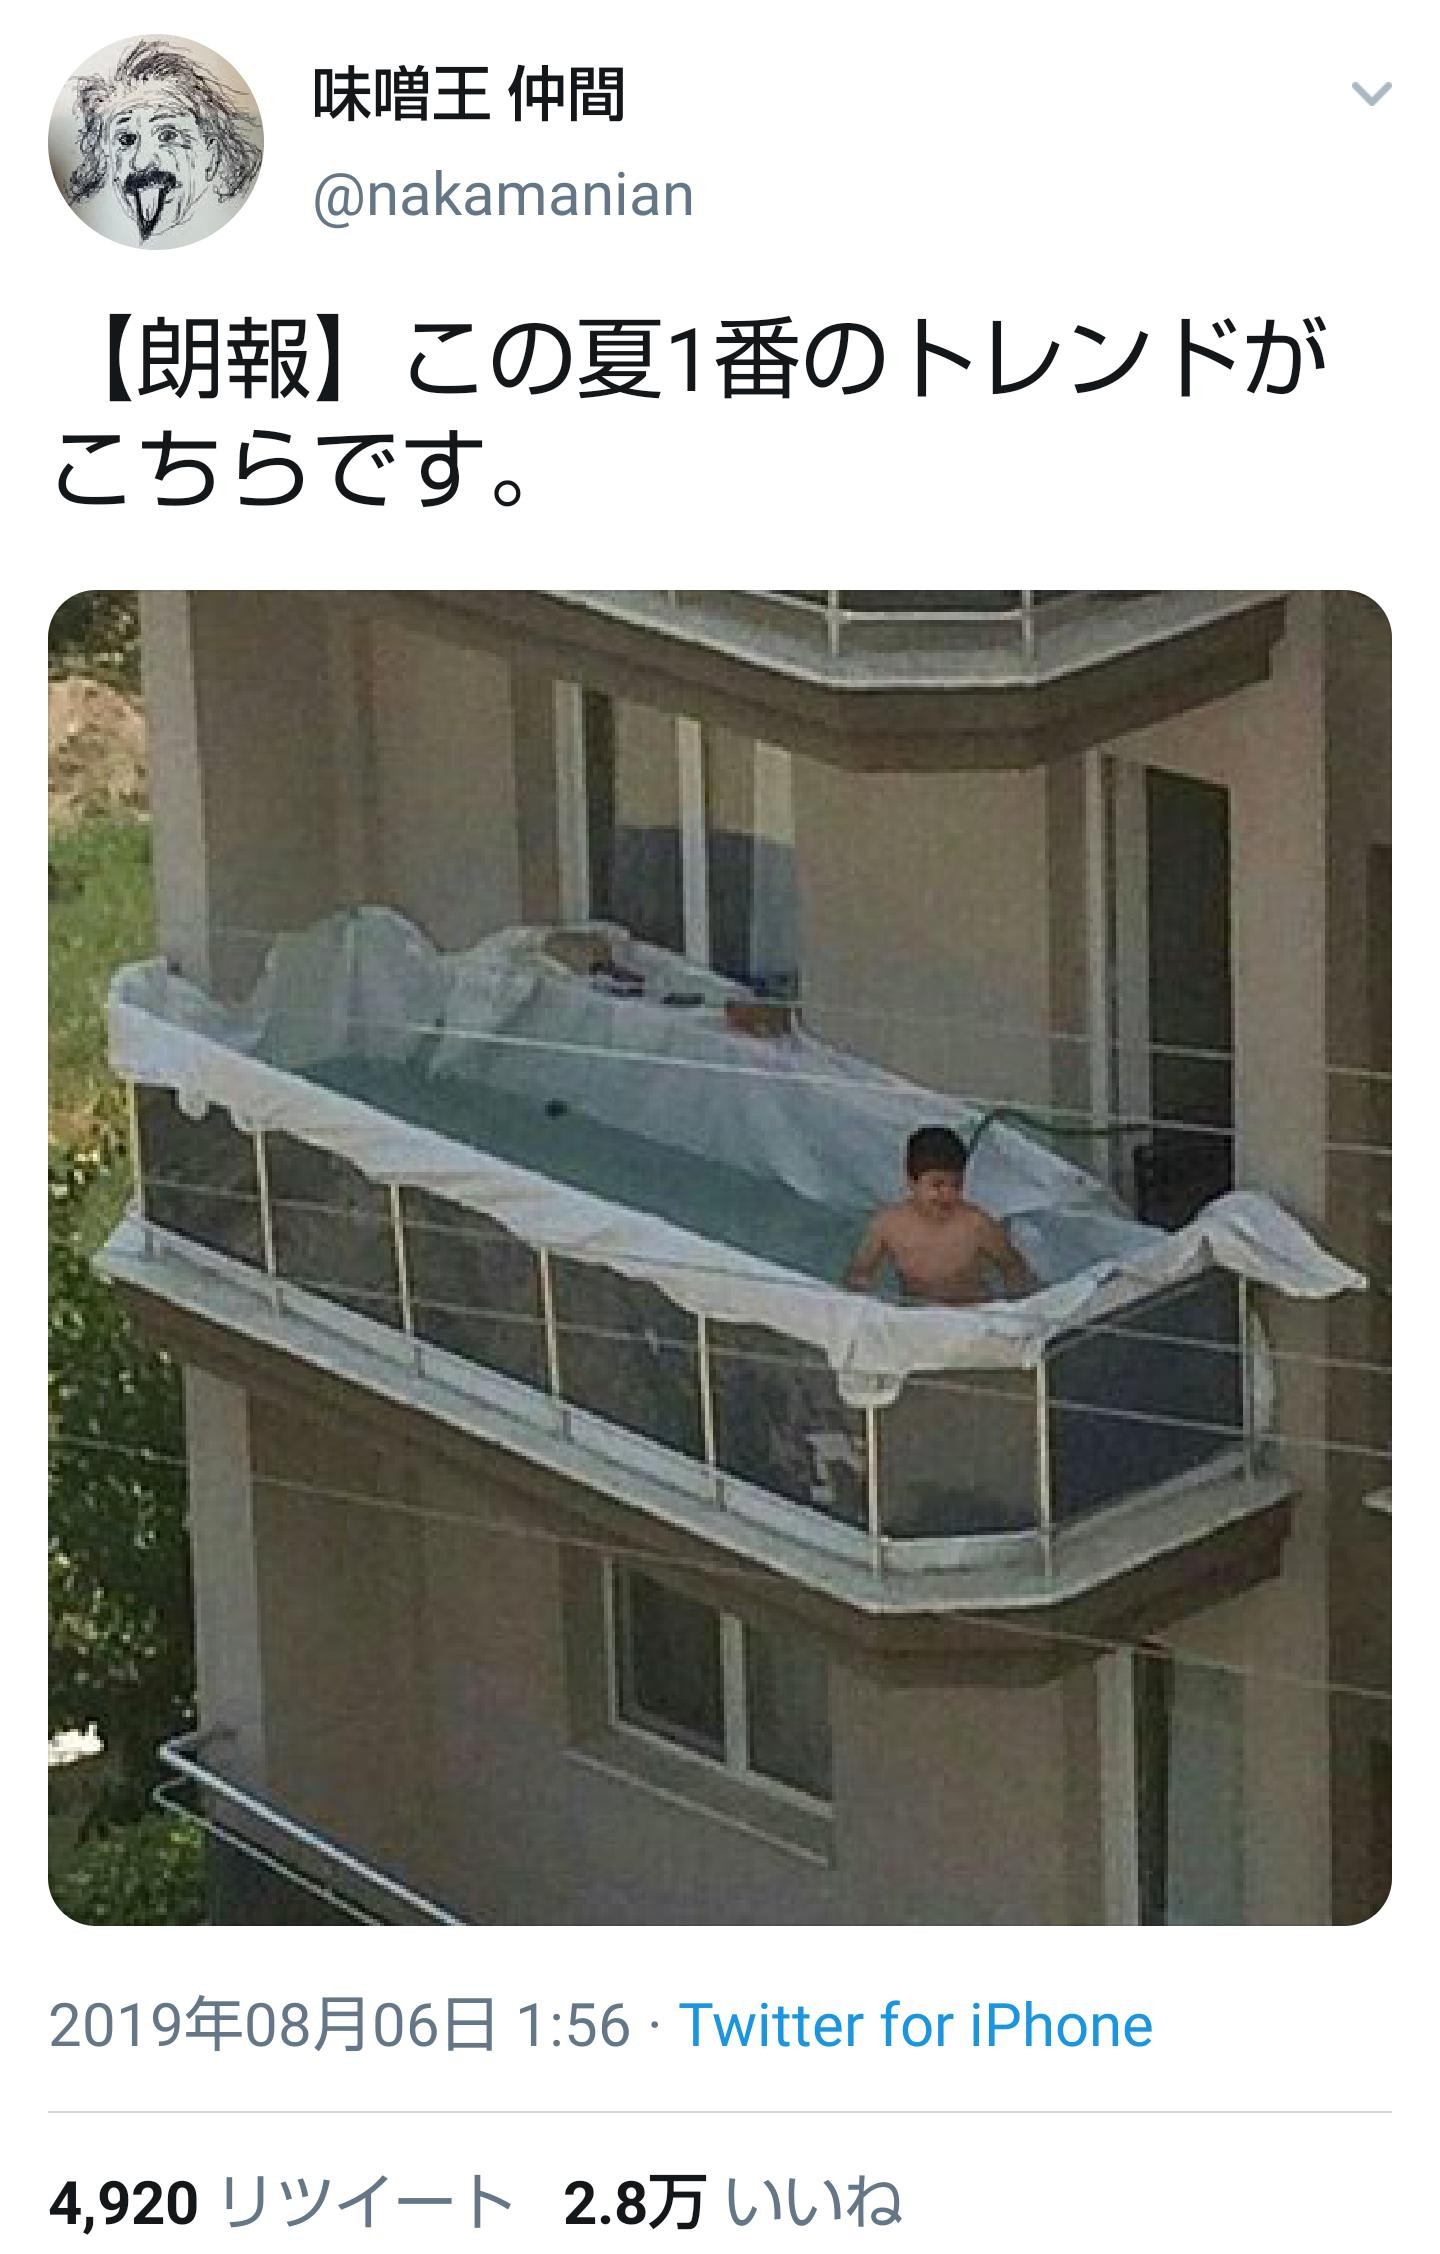 [Sad news] DQN's trend is to make the entire veranda into a pool ... Risk of collapse of the veranda due to the weight of water